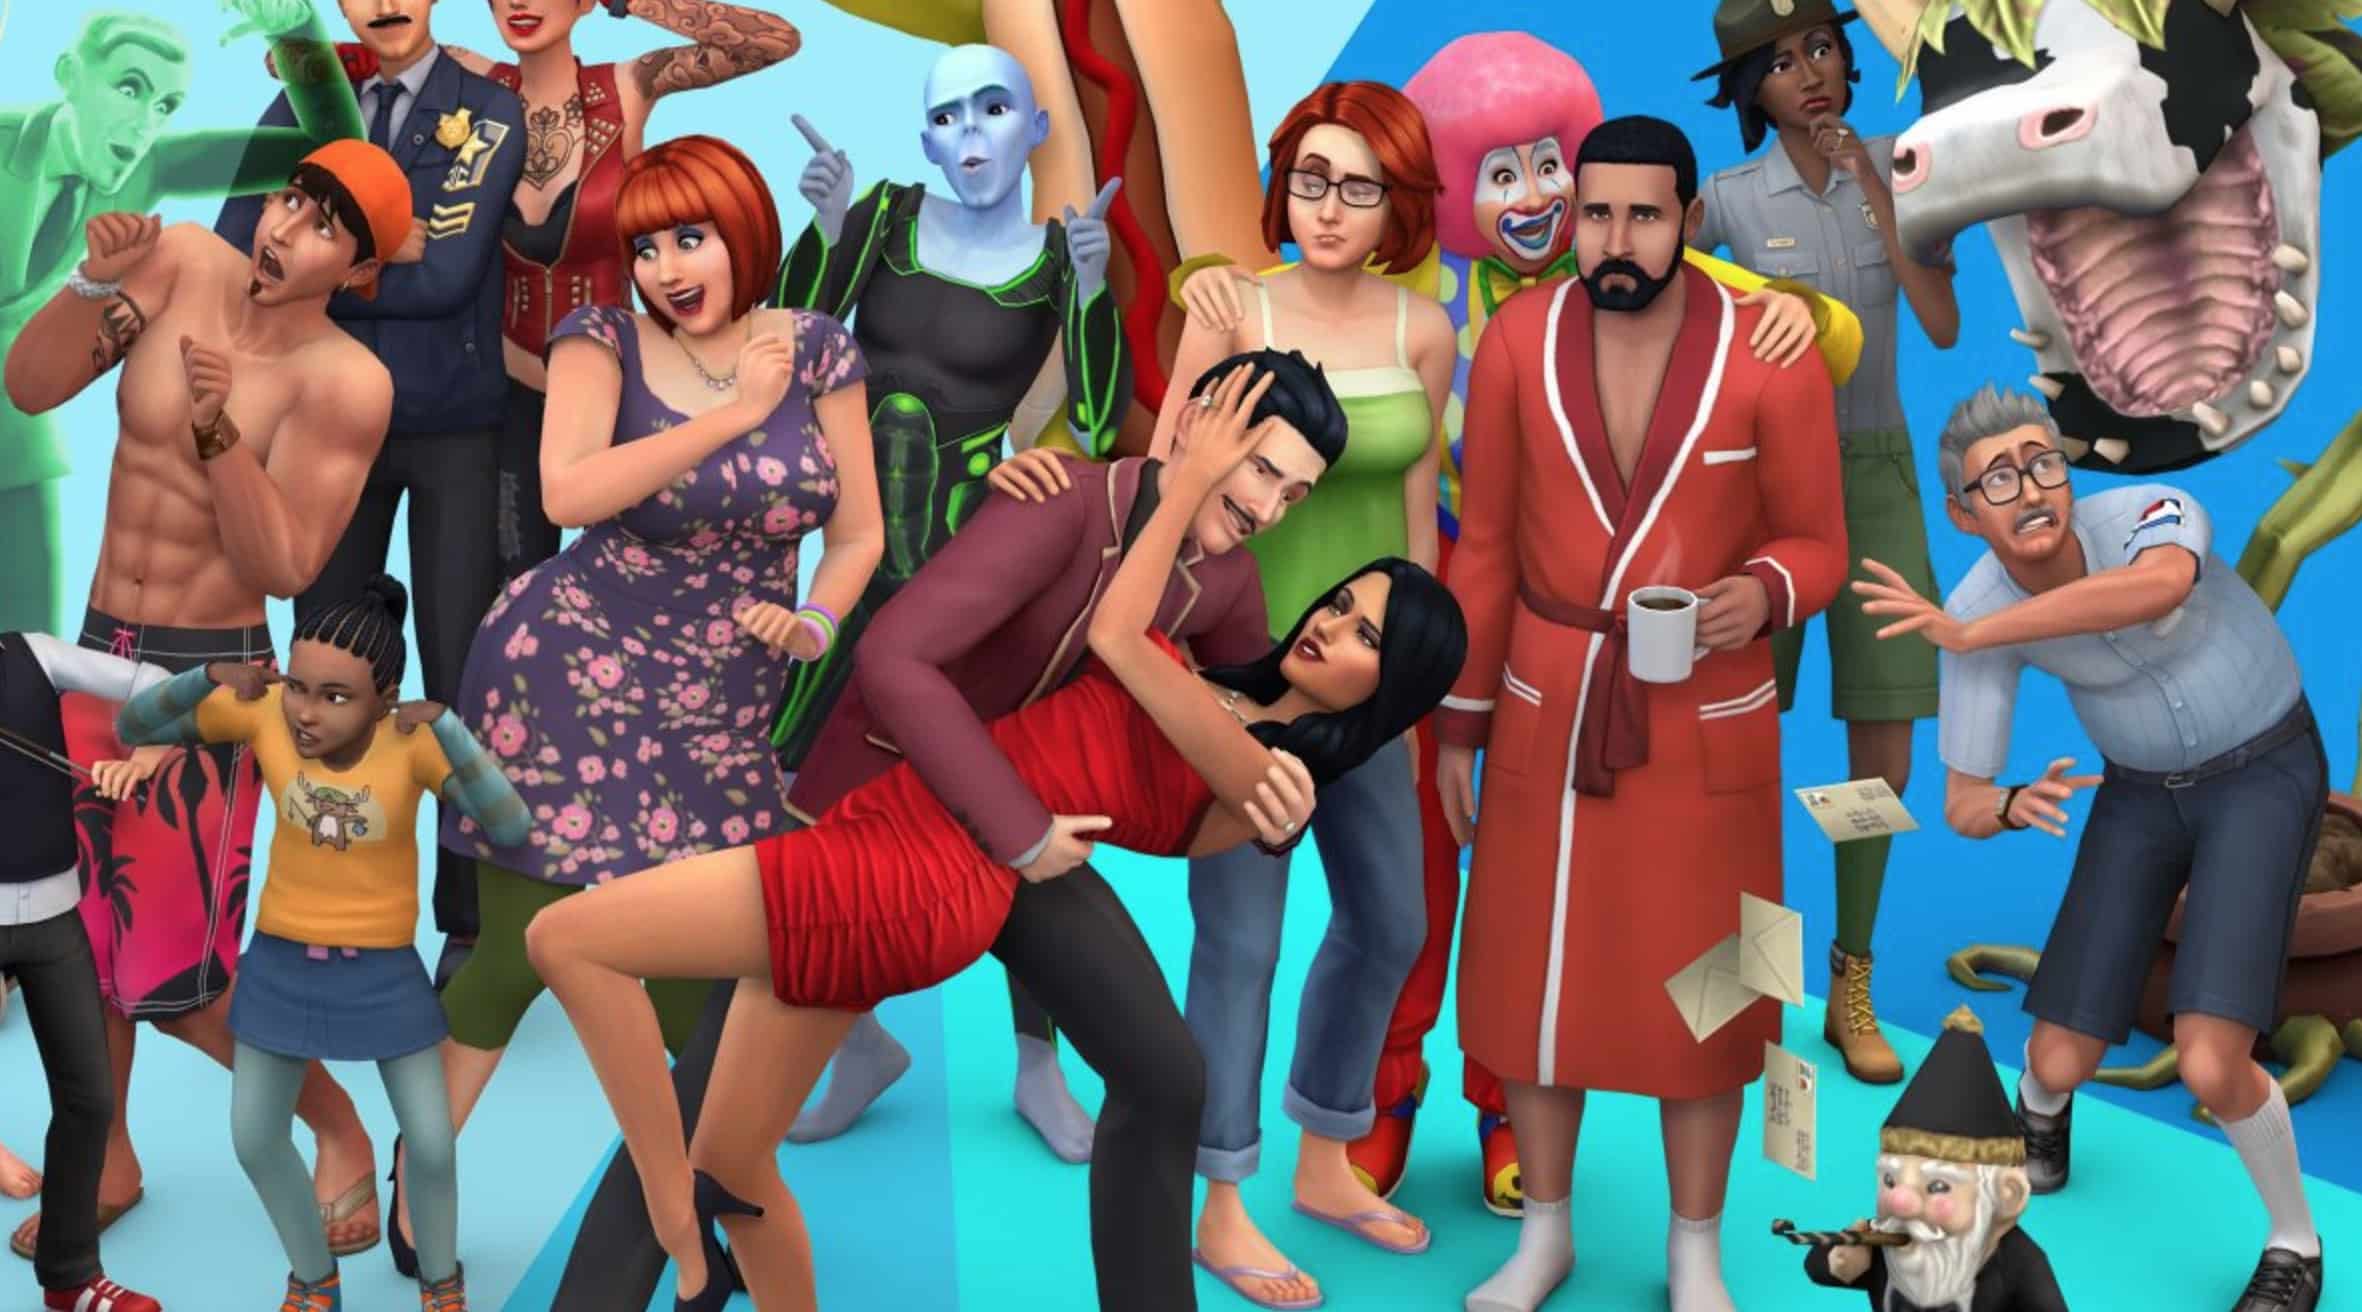 The Sims 4 Goes Free-To-Play Next Month